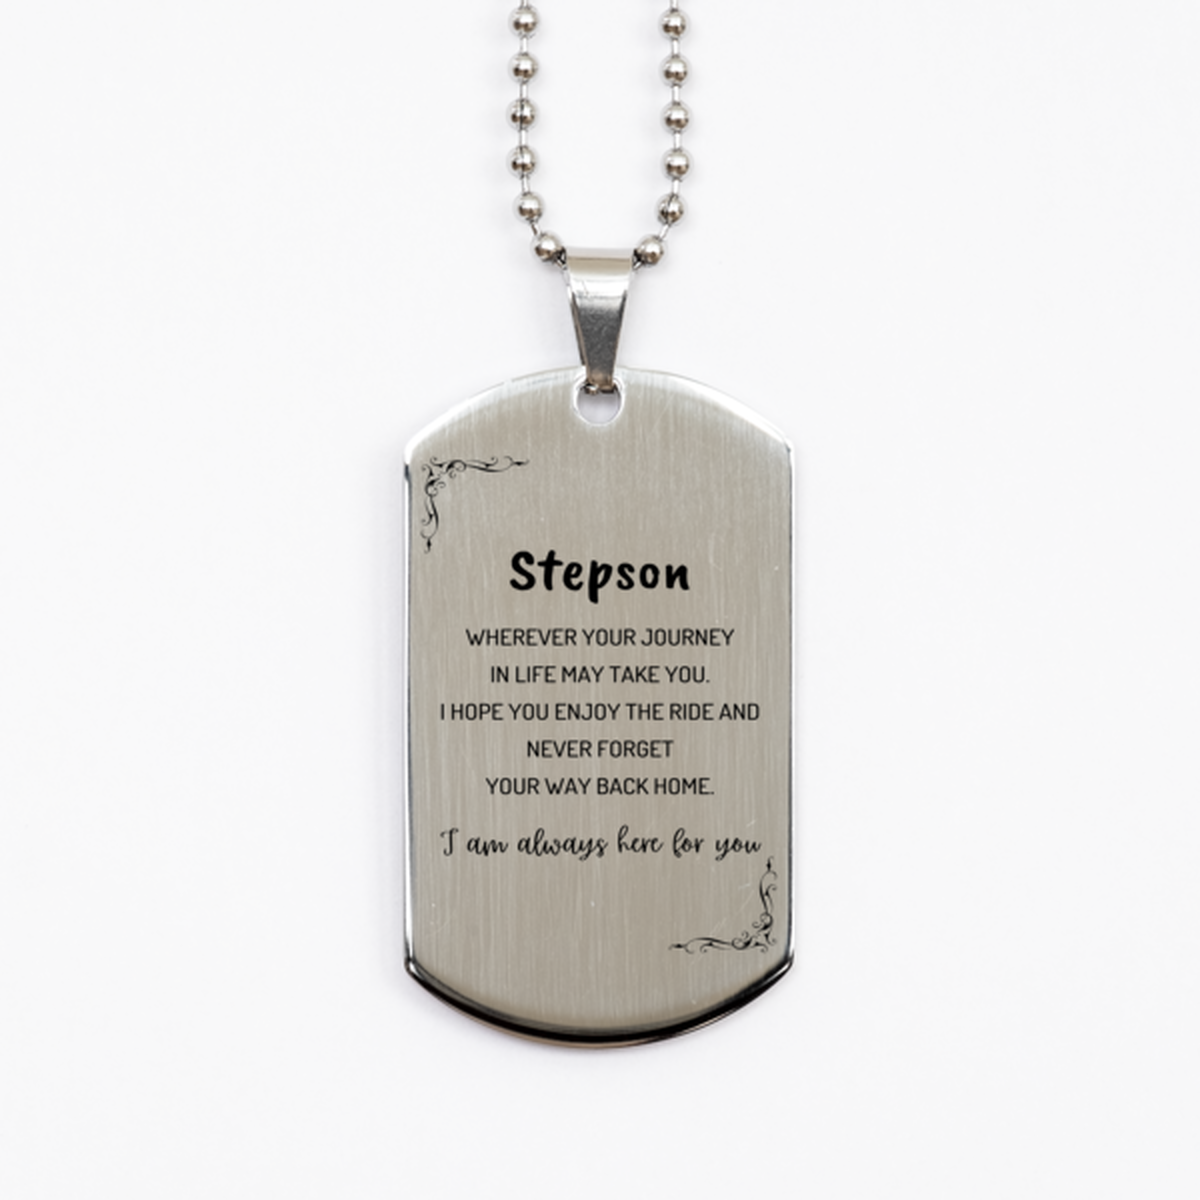 Stepson wherever your journey in life may take you, I am always here for you Stepson Silver Dog Tag, Awesome Christmas Gifts For Stepson, Stepson Birthday Gifts for Men Women Family Loved One